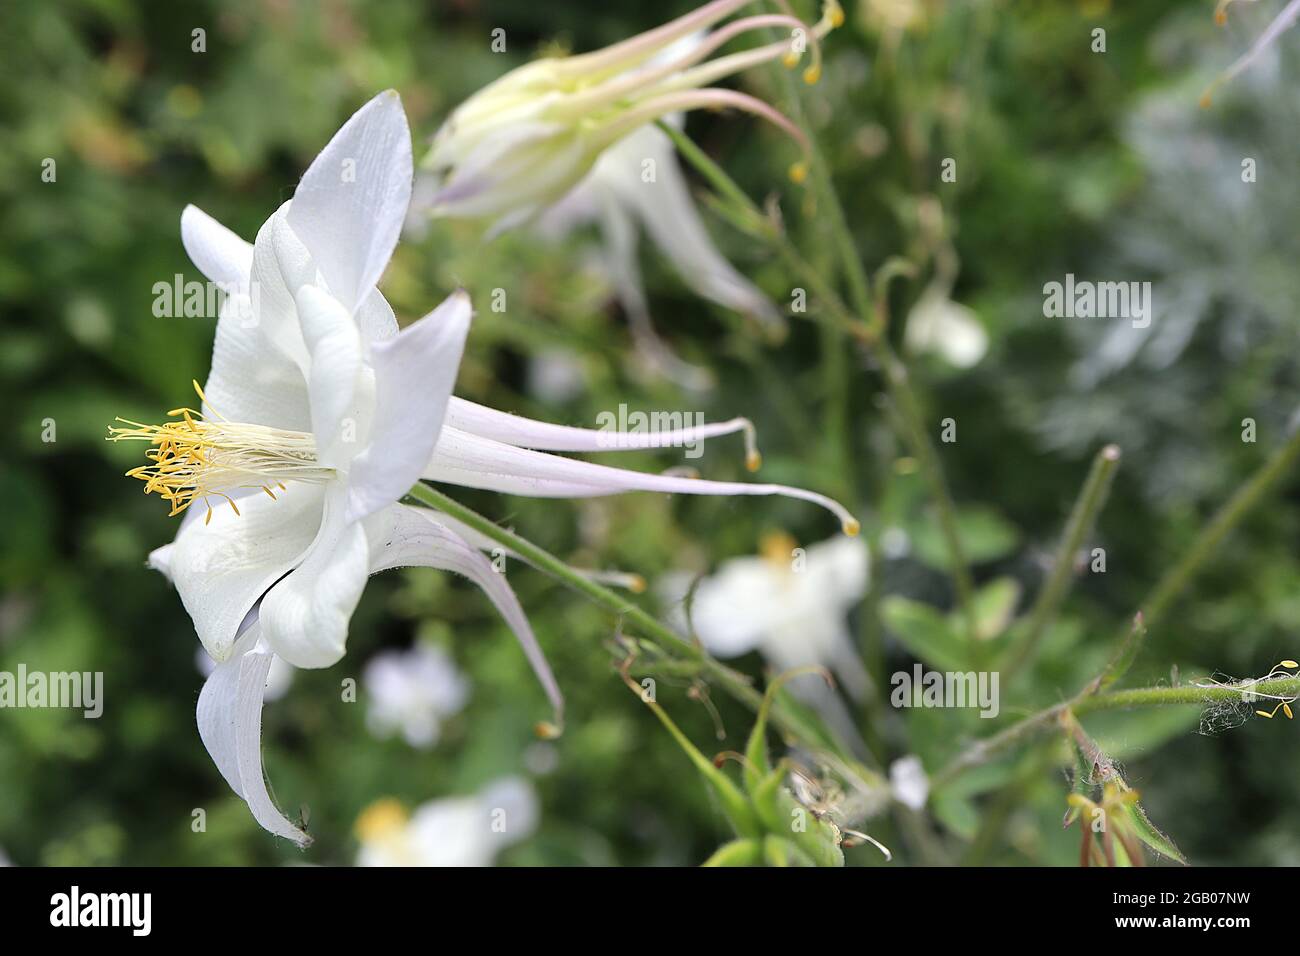 Aquilegia vulgaris ‘Crystal Star’ Columbine / Granny’s bonnet Crystal Star – white flowers with white flared sepals and straight yellow-tipped spurs Stock Photo